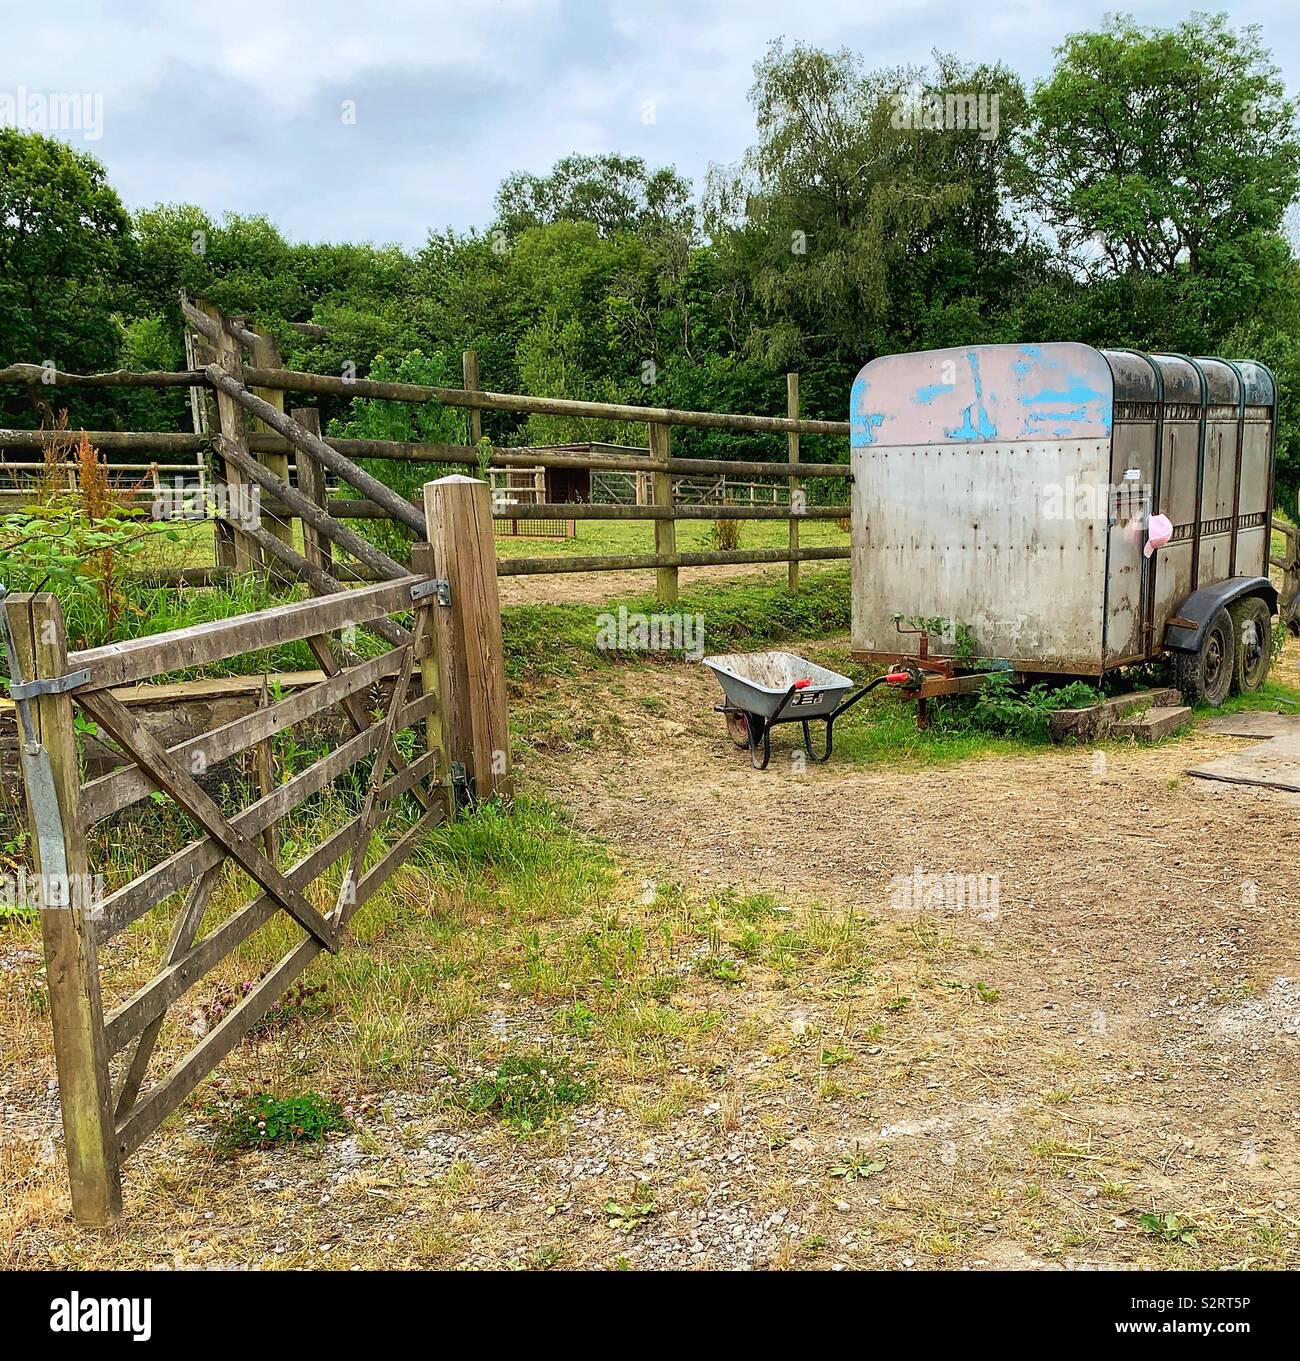 Open wooden gate and fence leading to horsebox with wheelbarrow Stock Photo